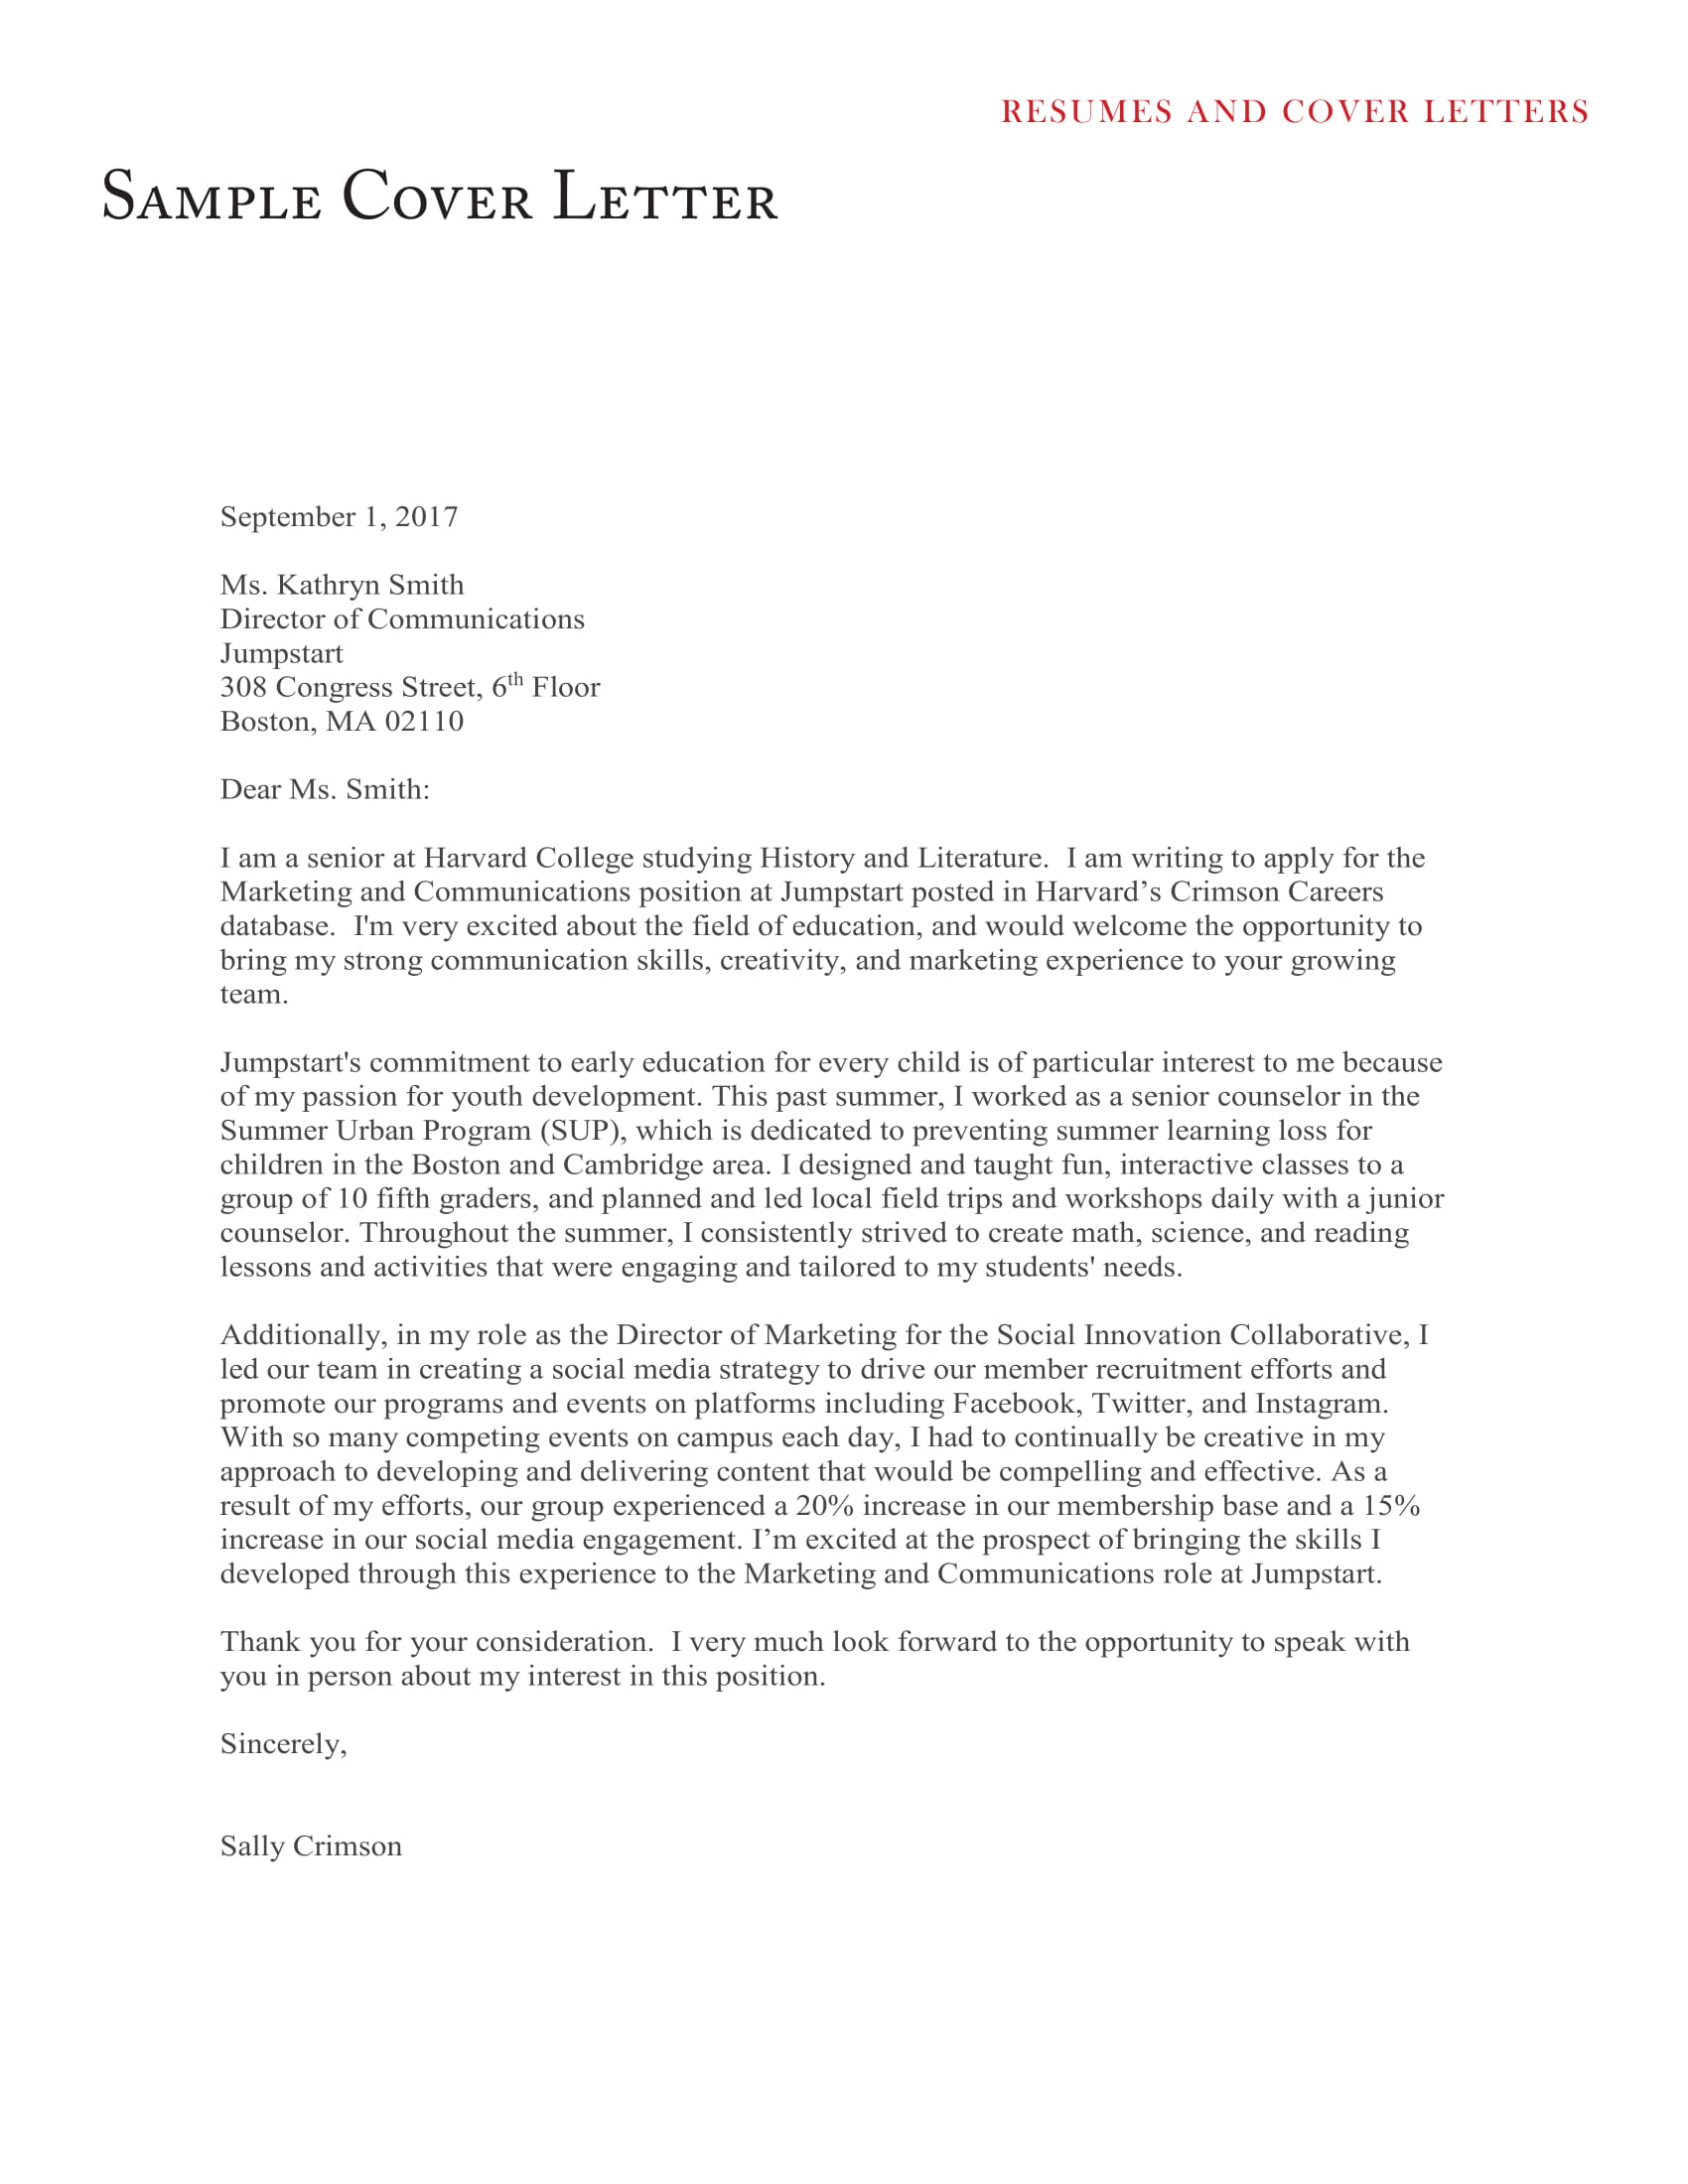 Essay cover letter examples